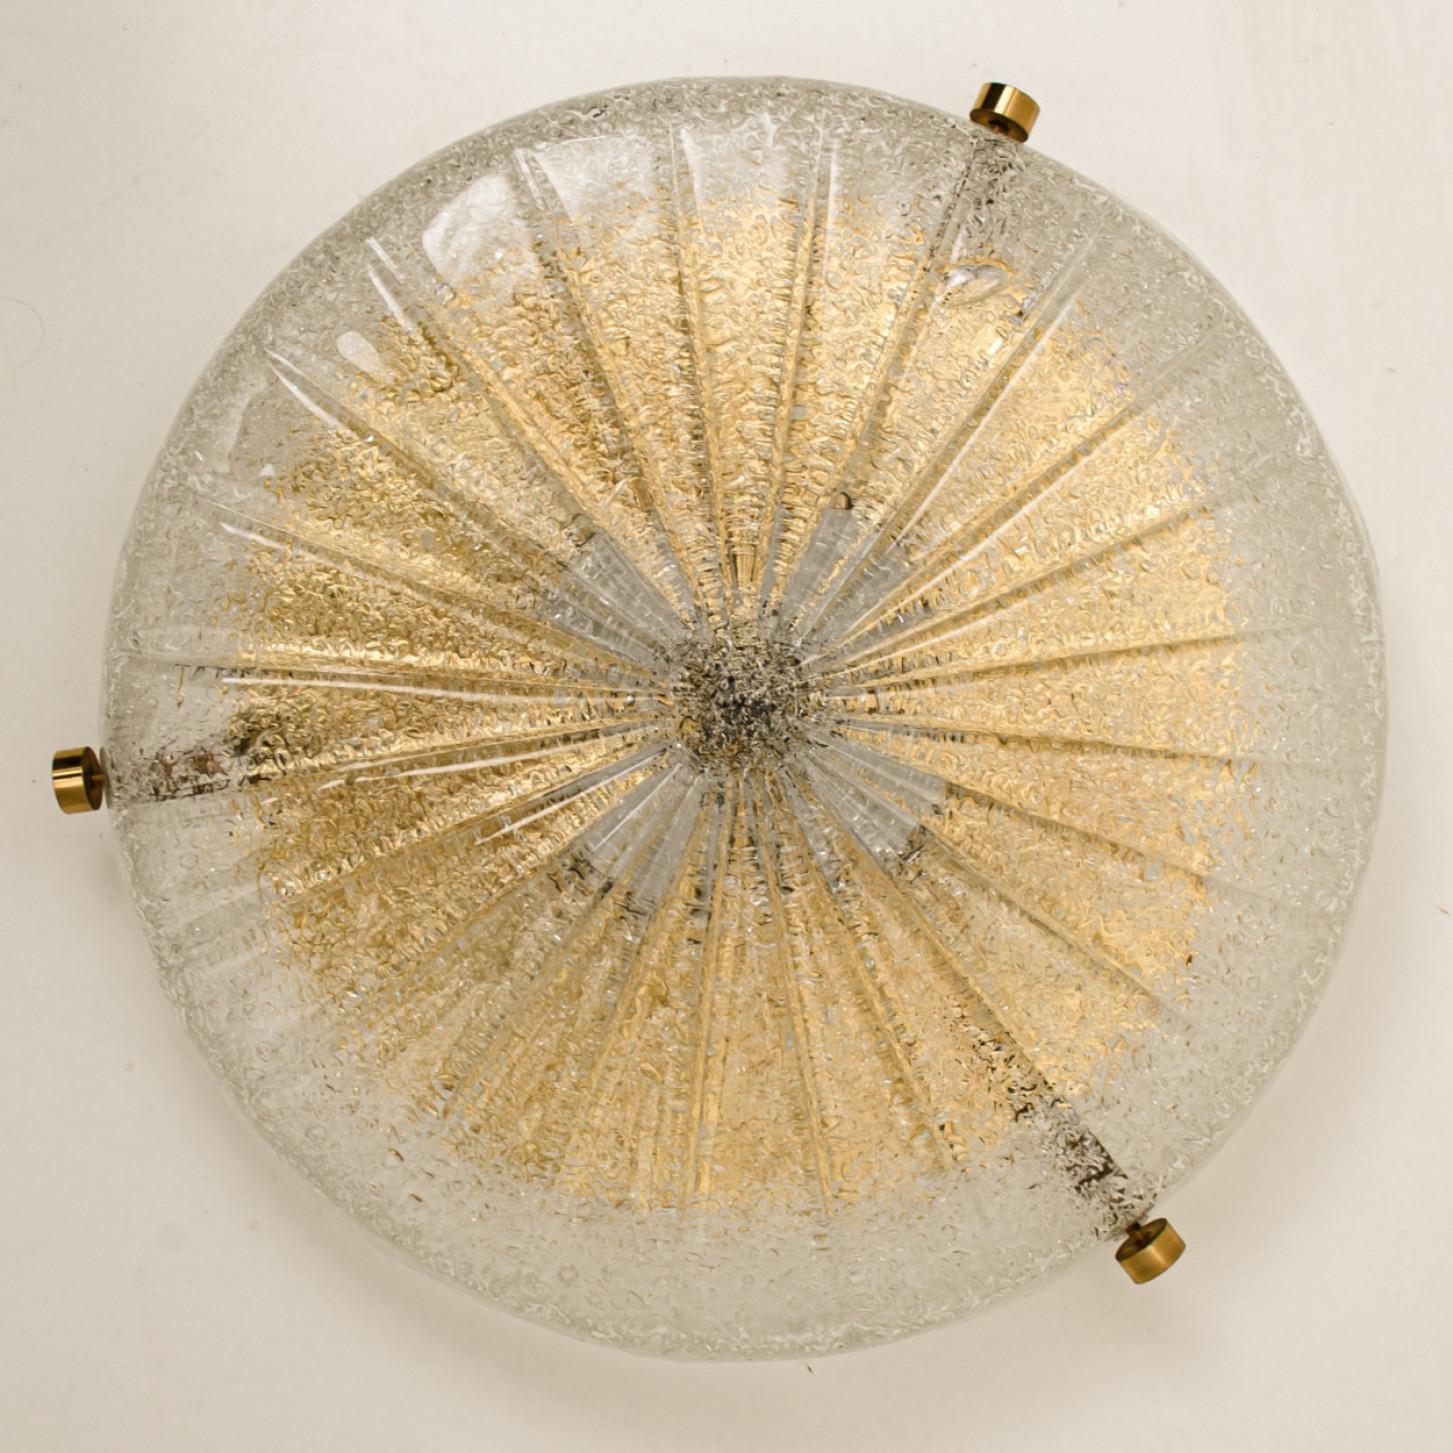 Stunning high-end brass and Murano glass flush mount manufactured in the late 1960s-early 1970s.  The think glass has a beautiful textured structure. With stripes of clear and opaque glass. Beautiful craftsmanship of the 20th century.

The timeless